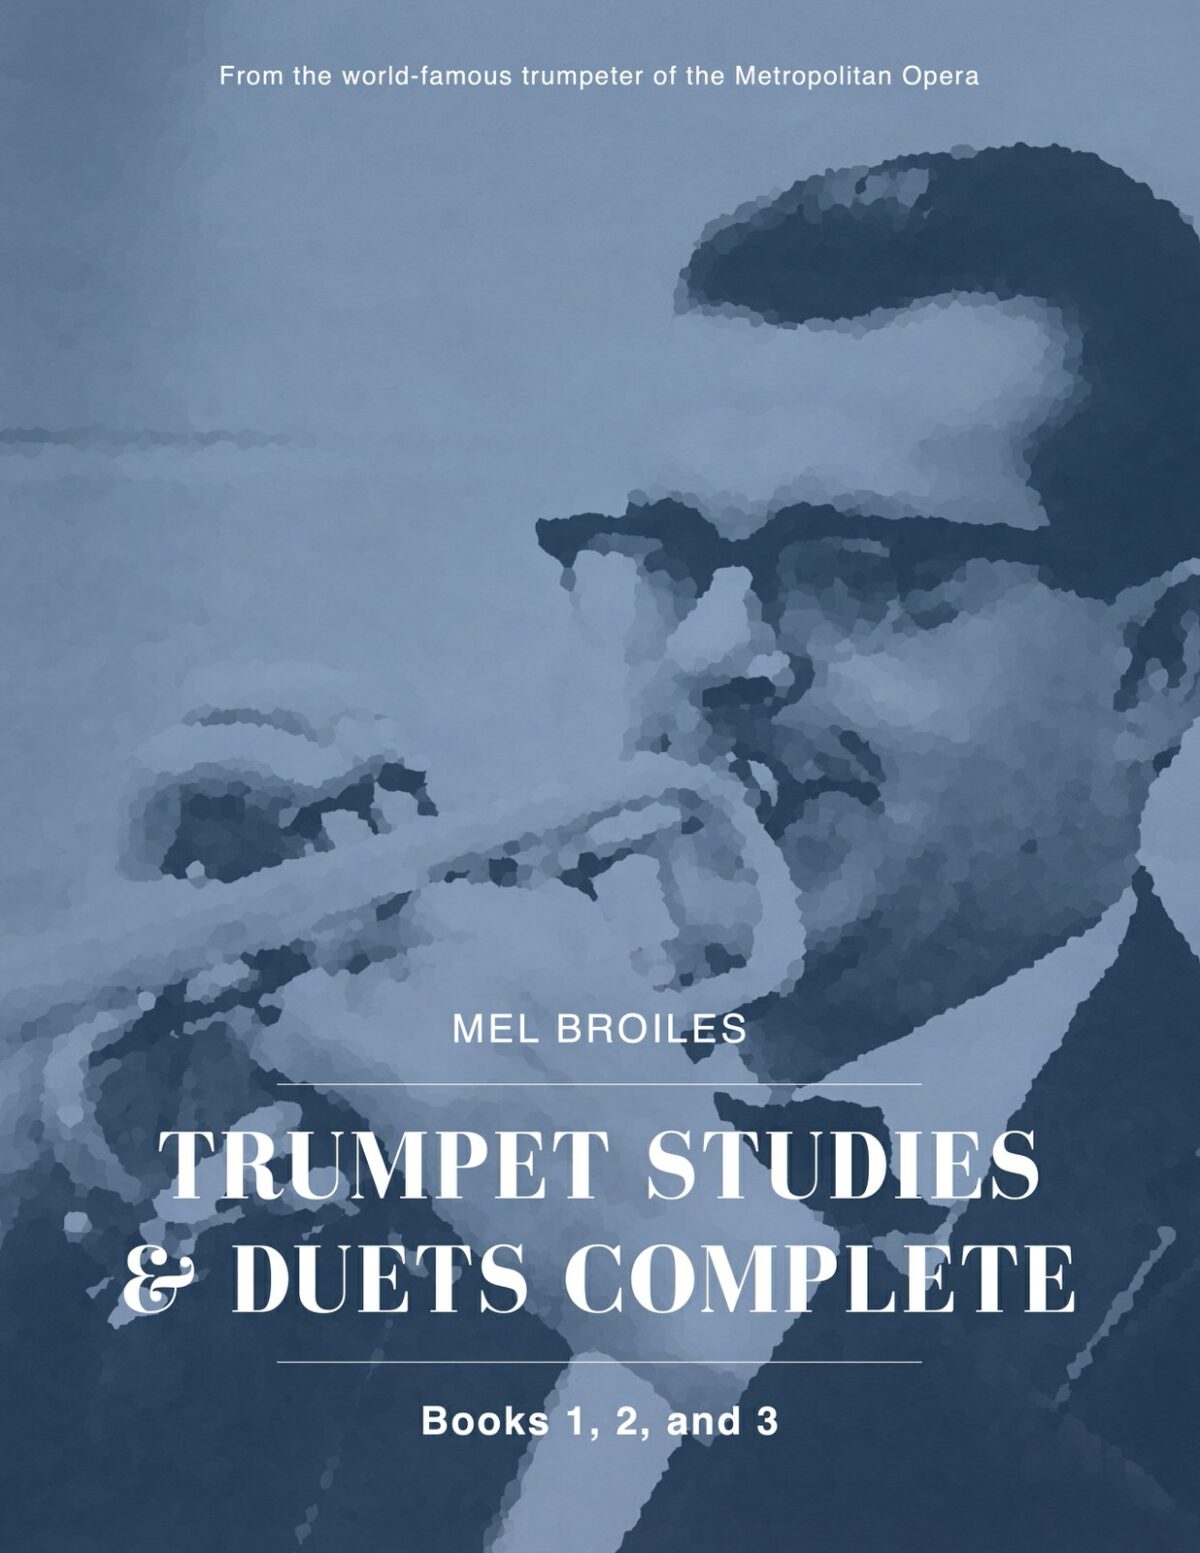 Broiles complete studies and duets 1-3-p1